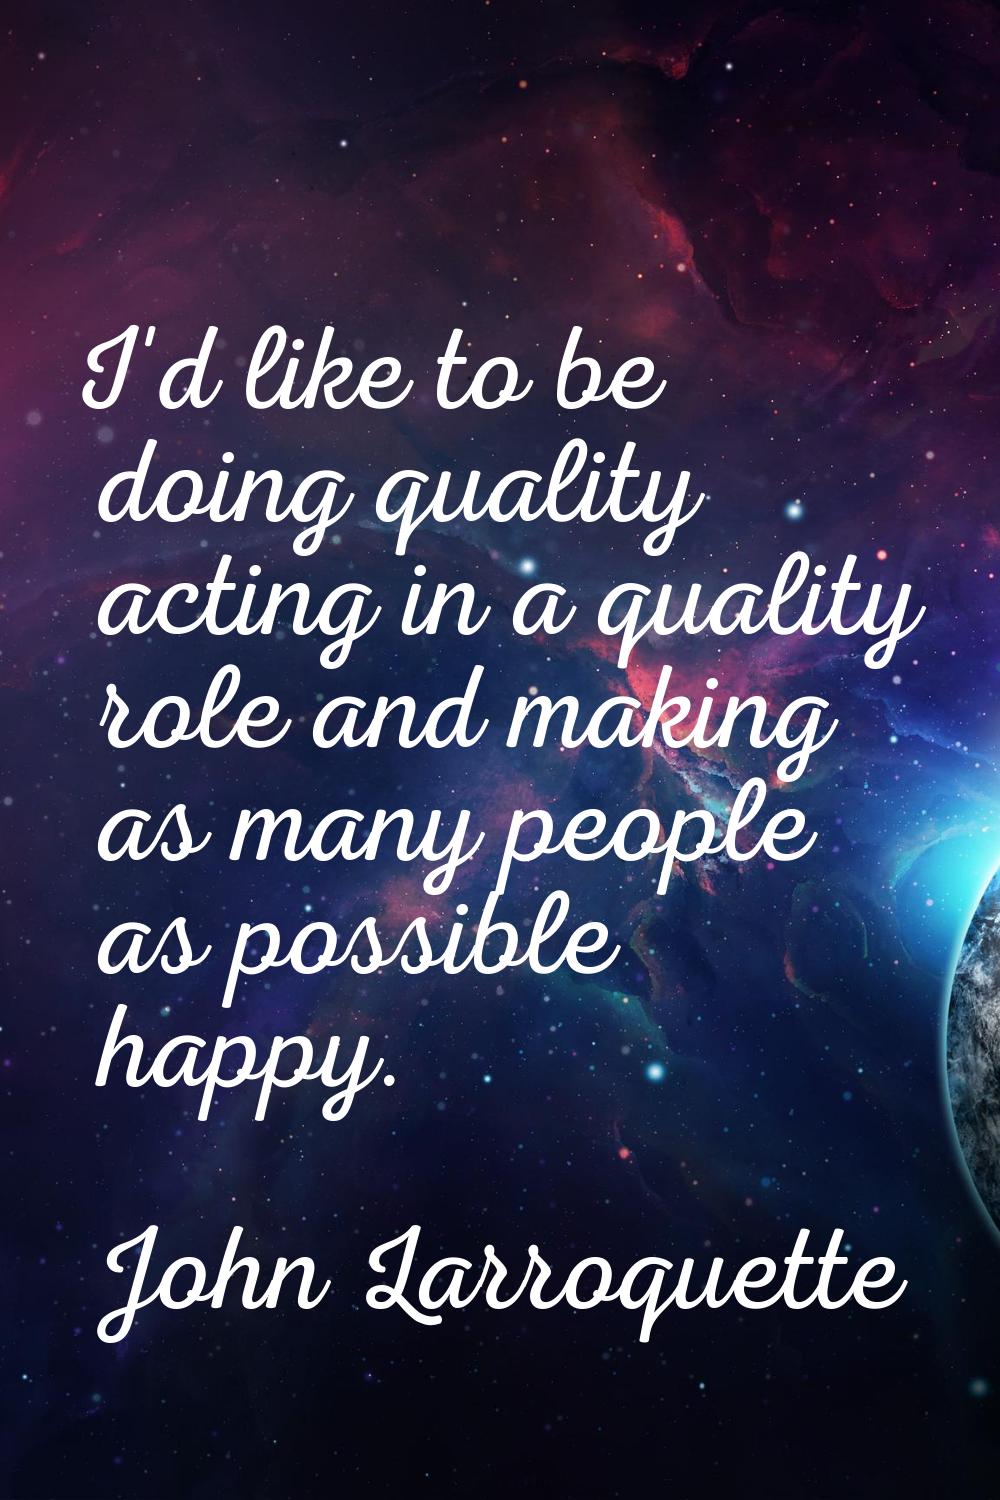 I'd like to be doing quality acting in a quality role and making as many people as possible happy.